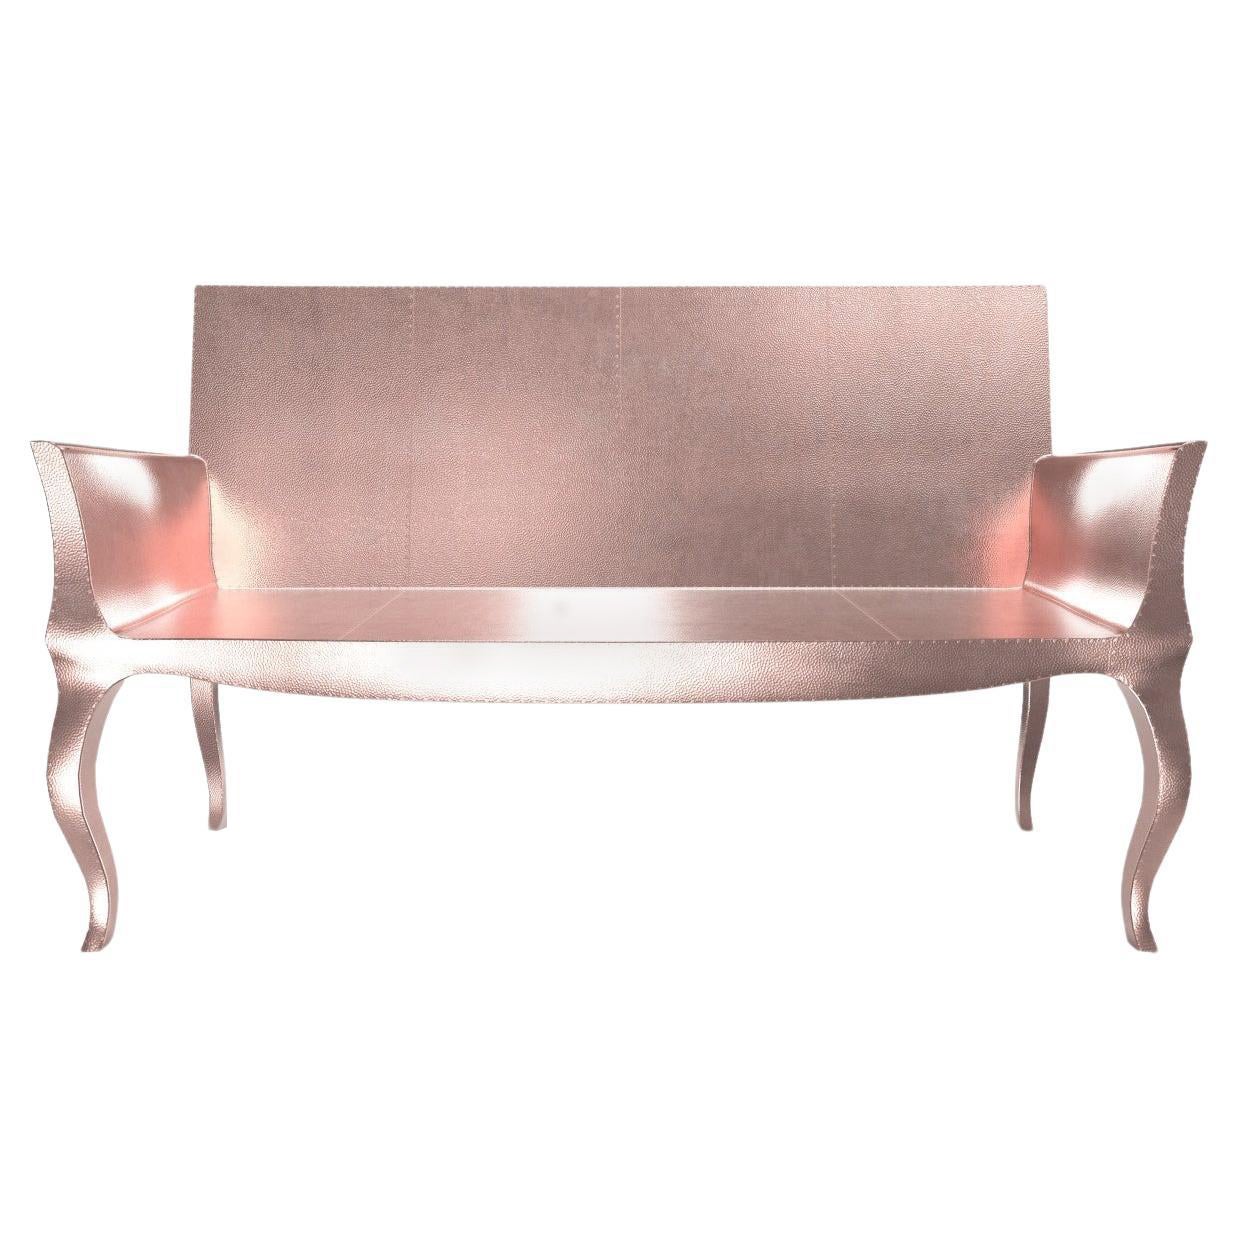 Louise Settee Art Deco Chaise Longues  in Mid. Hammered Copper by Paul Mathieu For Sale